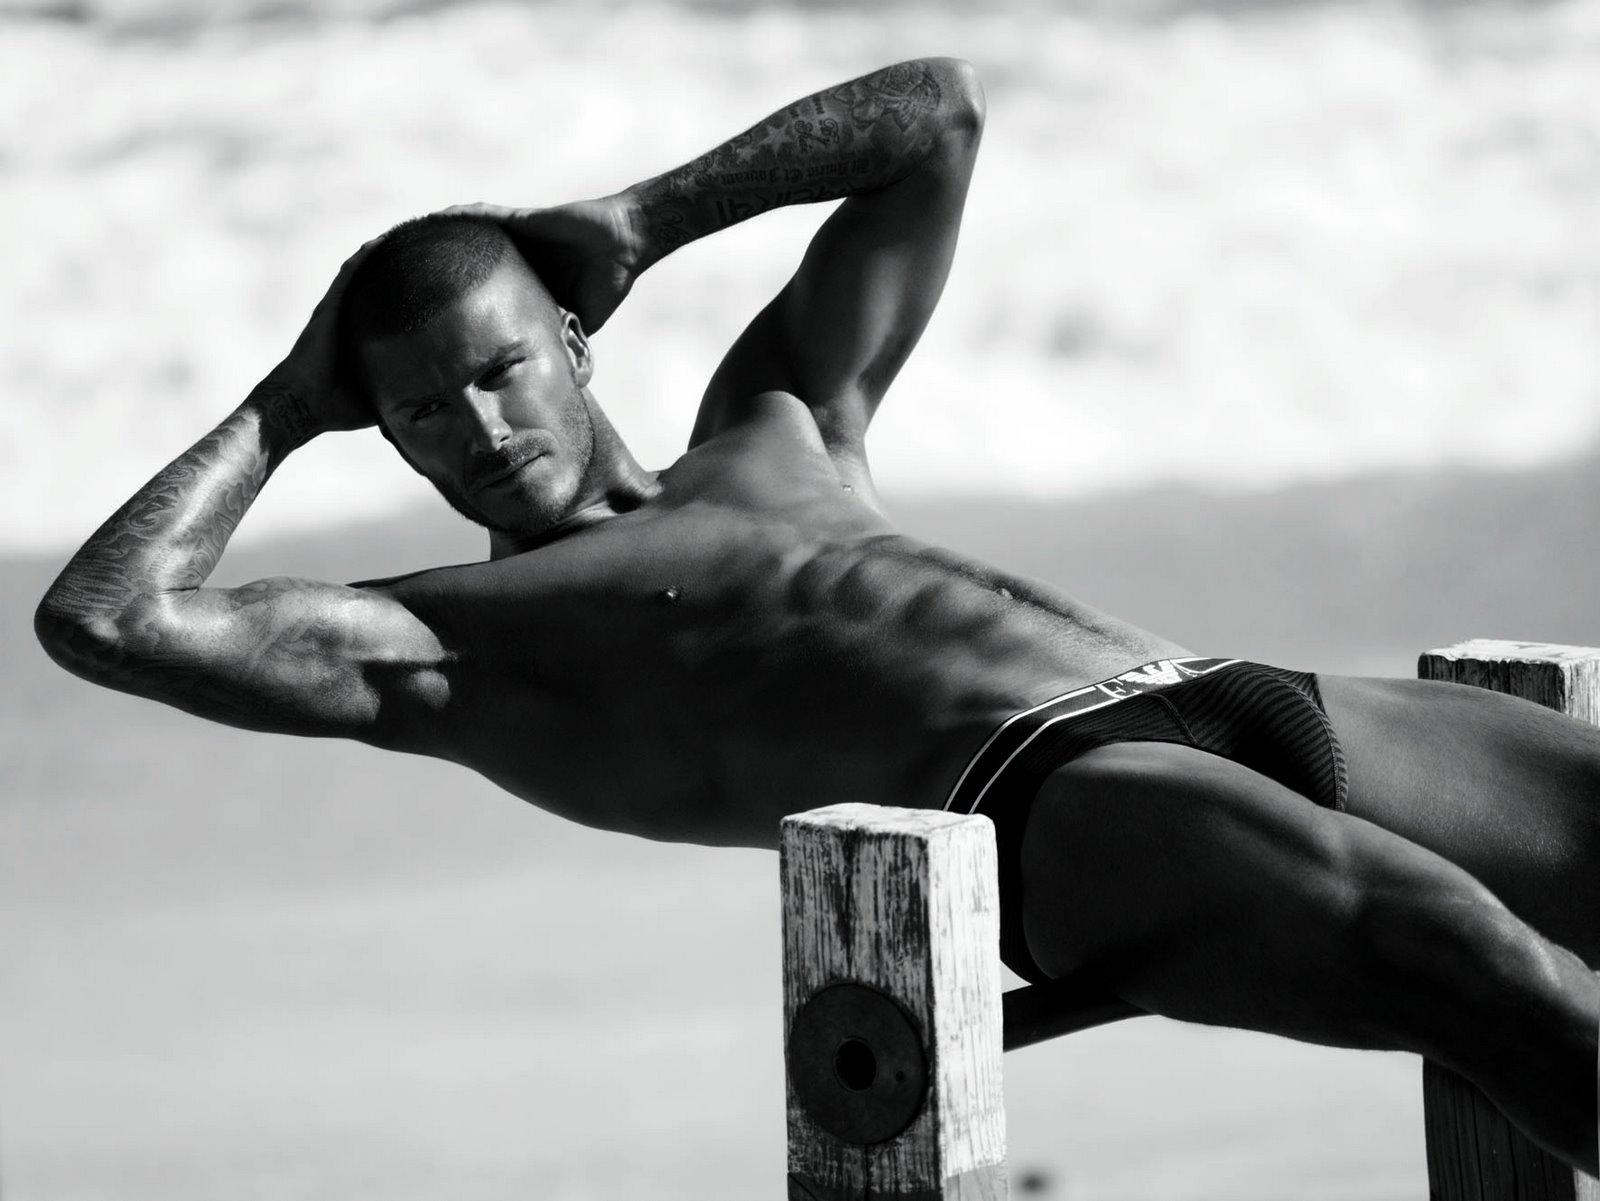 [Dude,+Why+Are+You+Staring+at+David+Beckham’s+Package+www.GutterUncensored.com+beckham-armani-situp-bw.jpg]